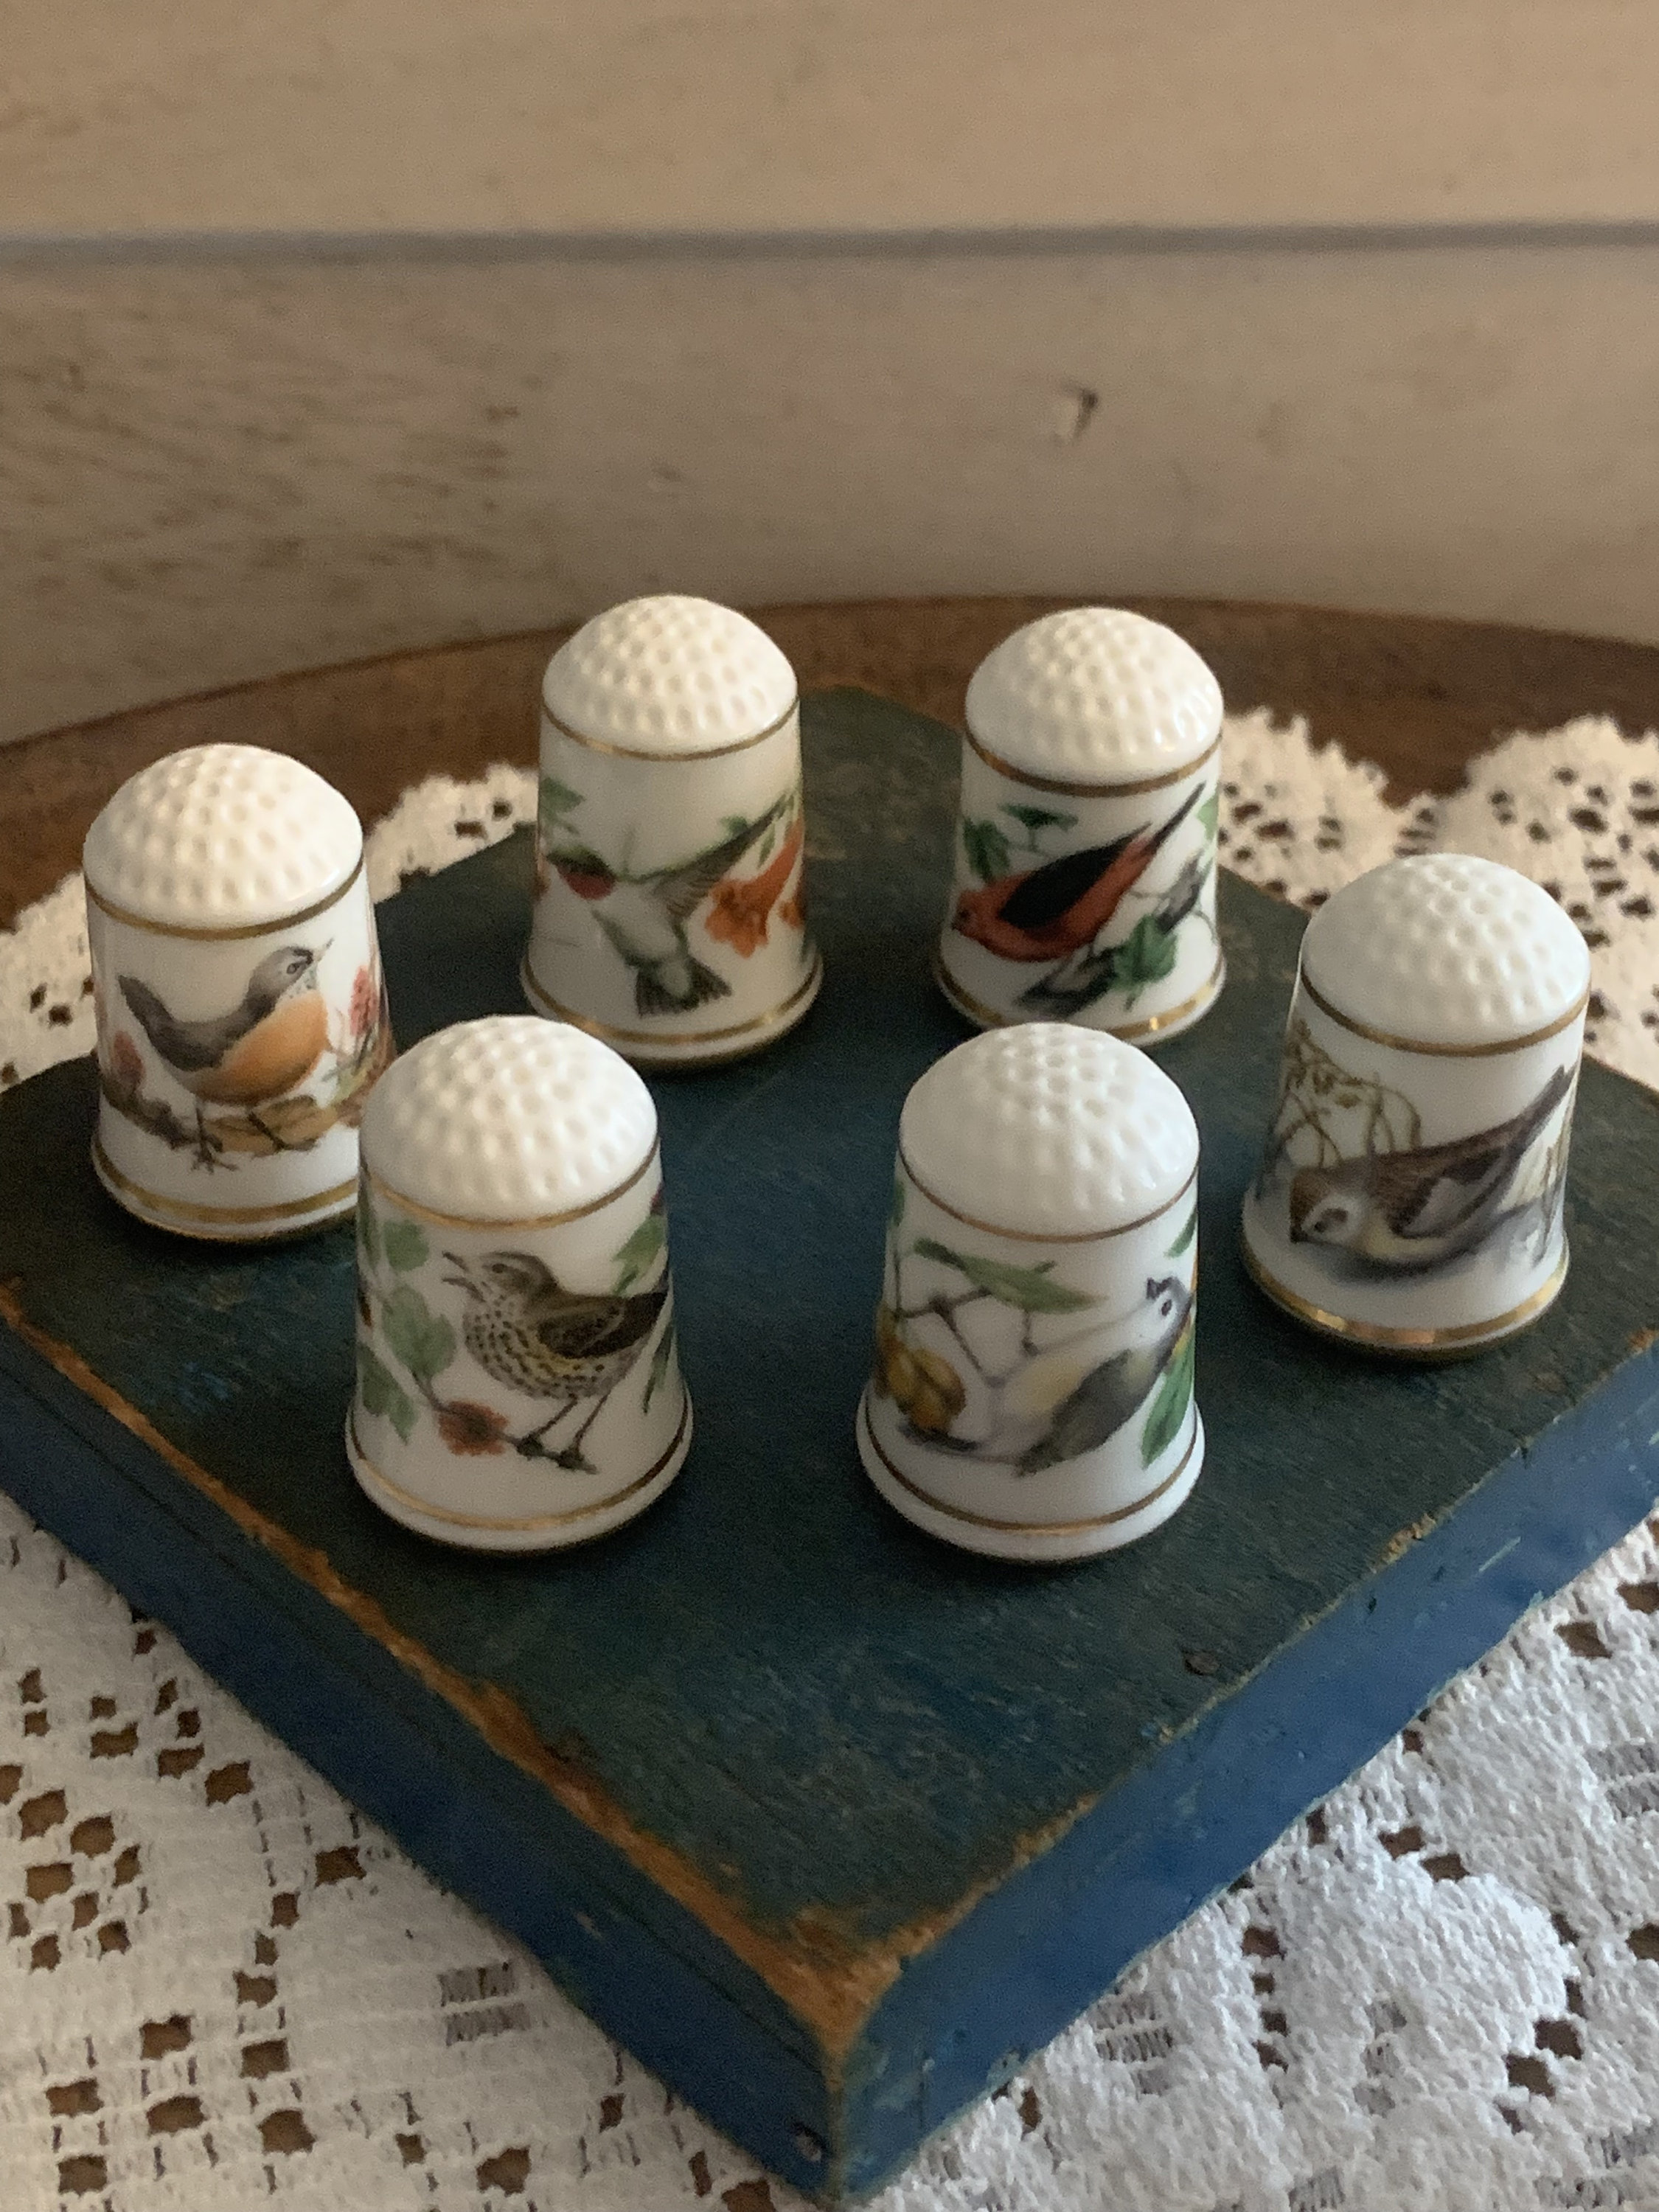 Thimble Collection in Display Case. Vintage French Porcelain and Silver  Metal Thimbles. Craft and Sewing Room Decor. Gifts For Her.